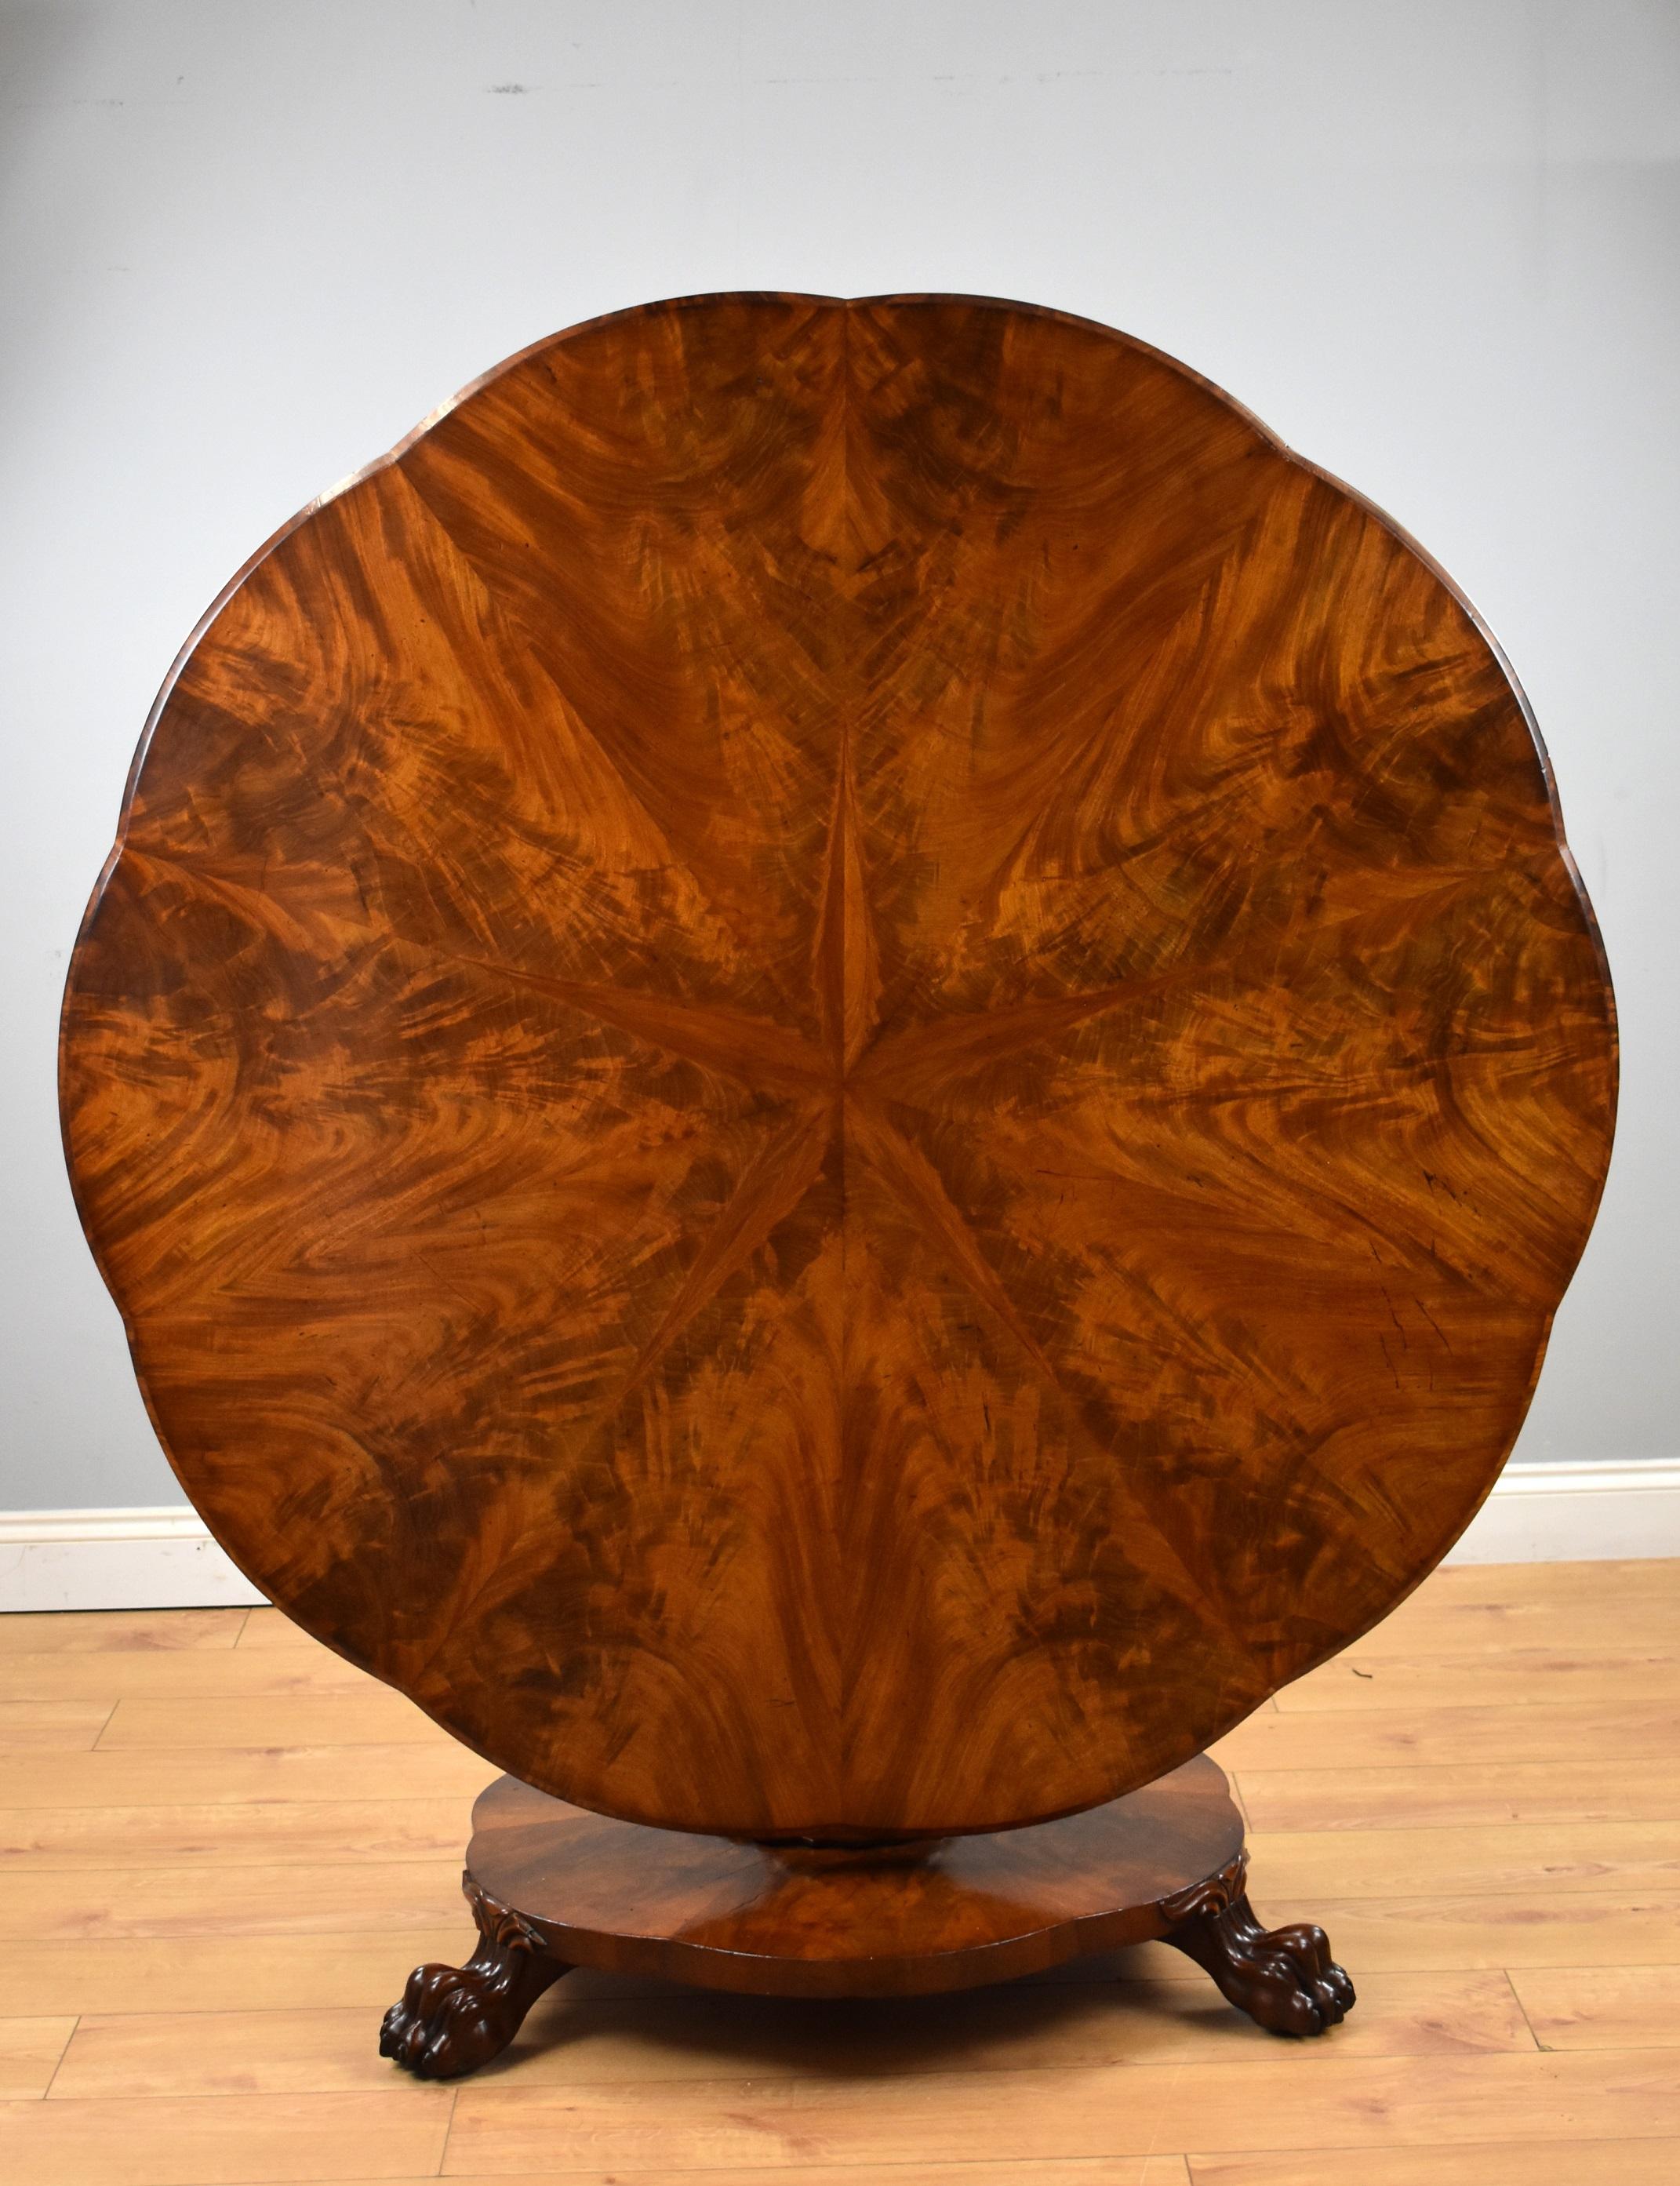 For sale is a fine quality early Victorian flame mahogany breakfast table, having a shaped and chamfered top, with radial starburst figured mahogany veneer, with a vase shaped faceted column above a shaped platform base raised on lions paw feet. The